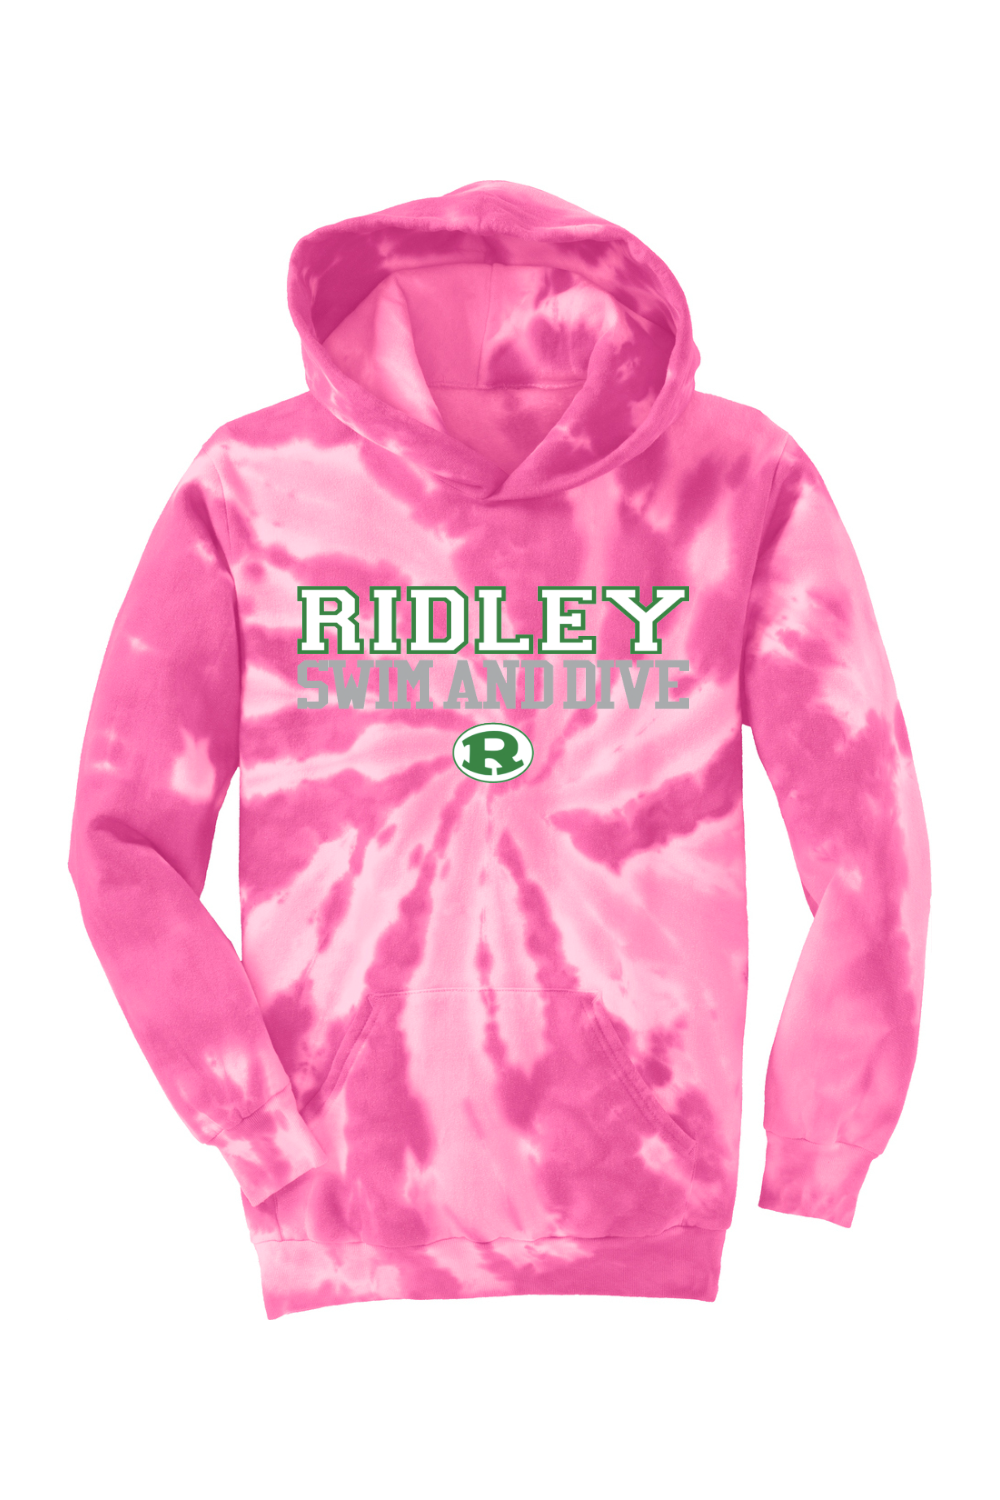 Ridley Swim and Dive Port & Company Youth Tie-Dye Pullover Hooded Sweatshirt